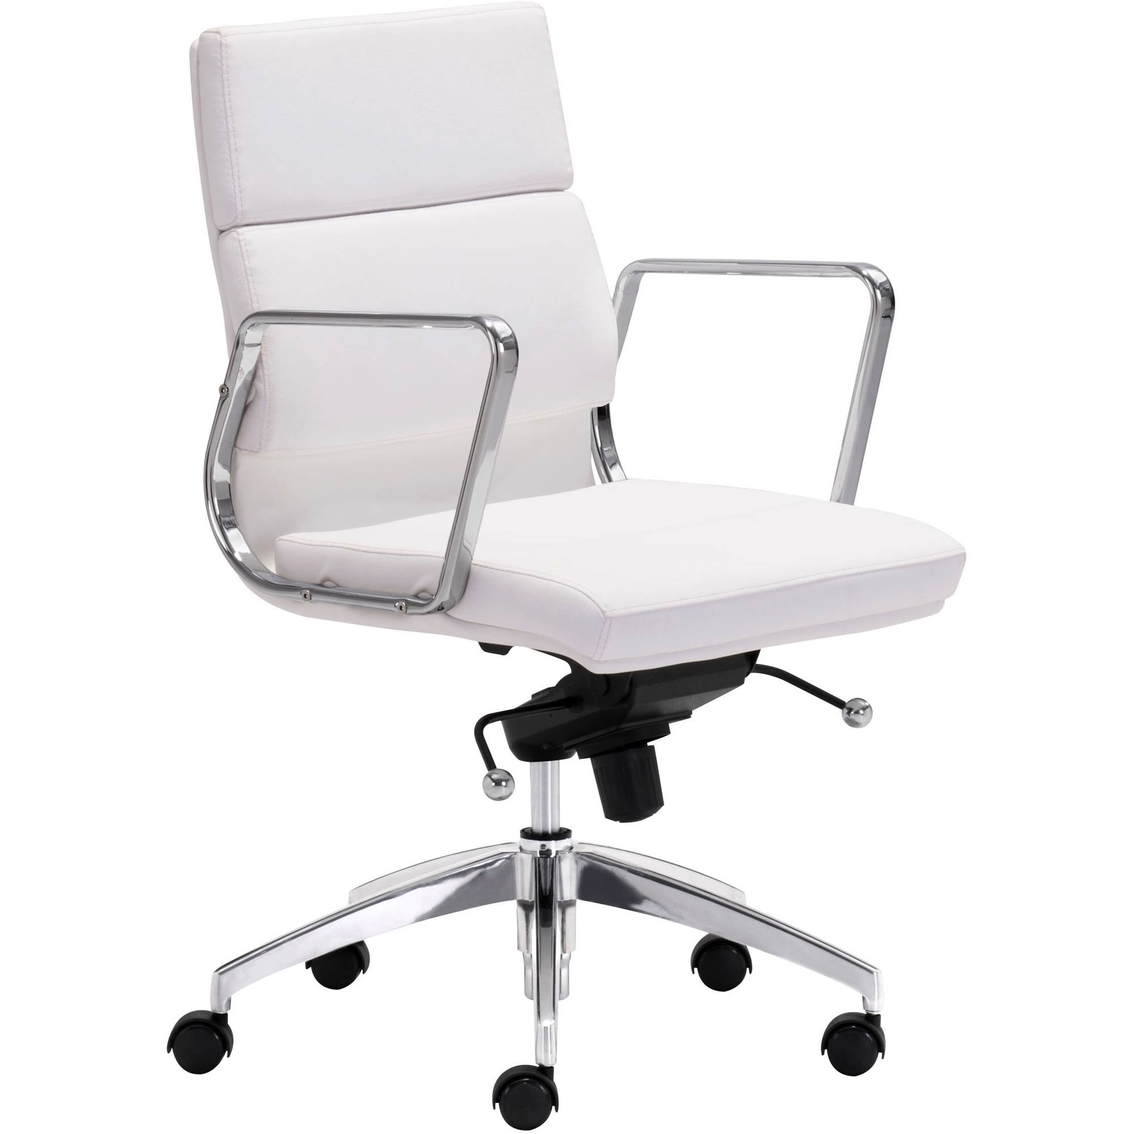 Zuo Modern Engineer Low Back Office Chair - Image 3 of 4